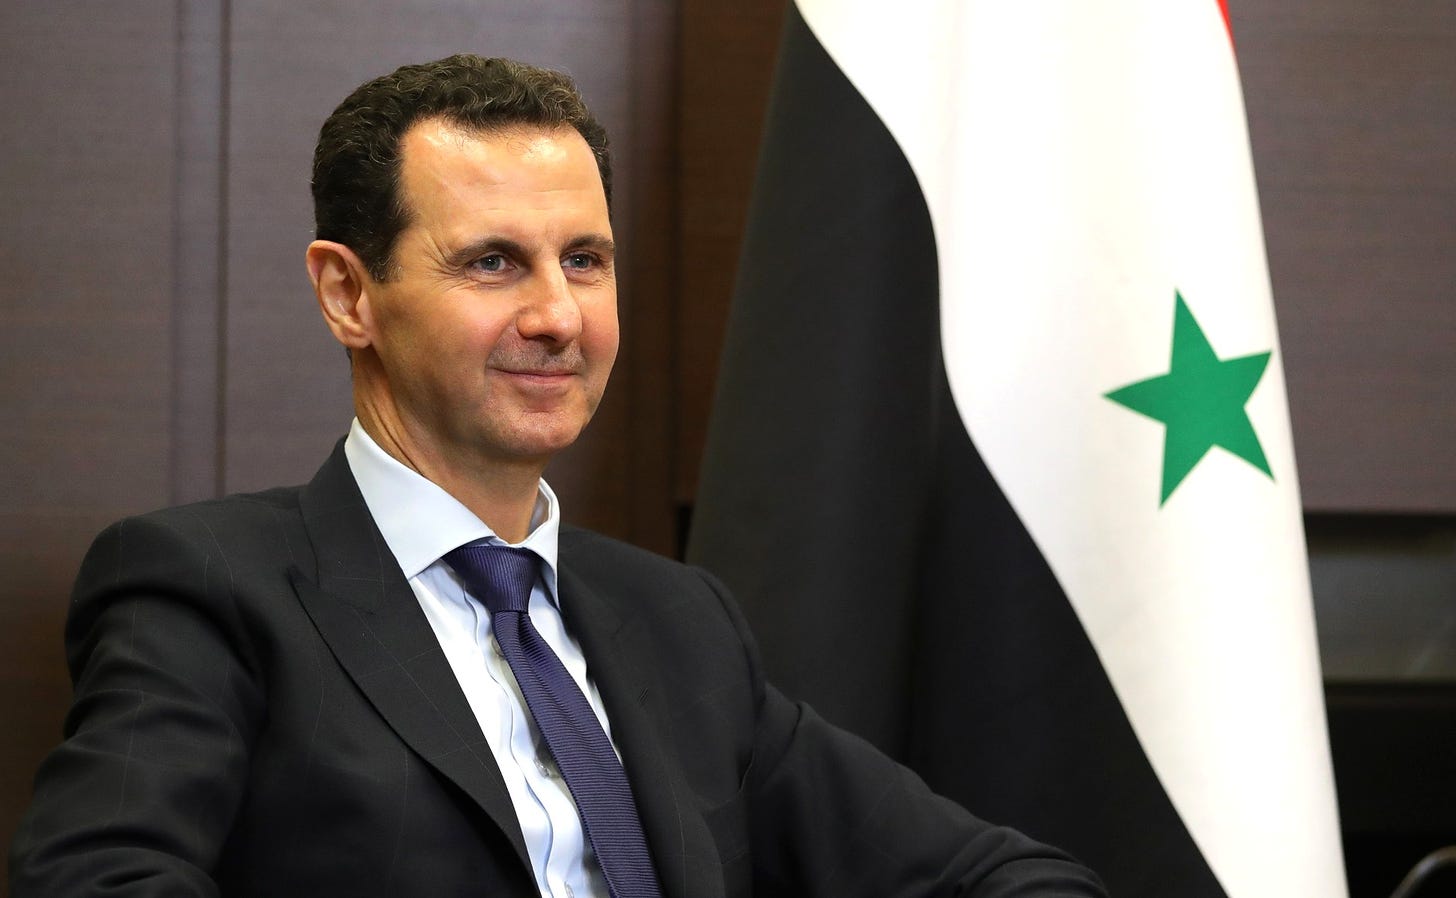 A man grins with a sneer in front of a Syrian flag.